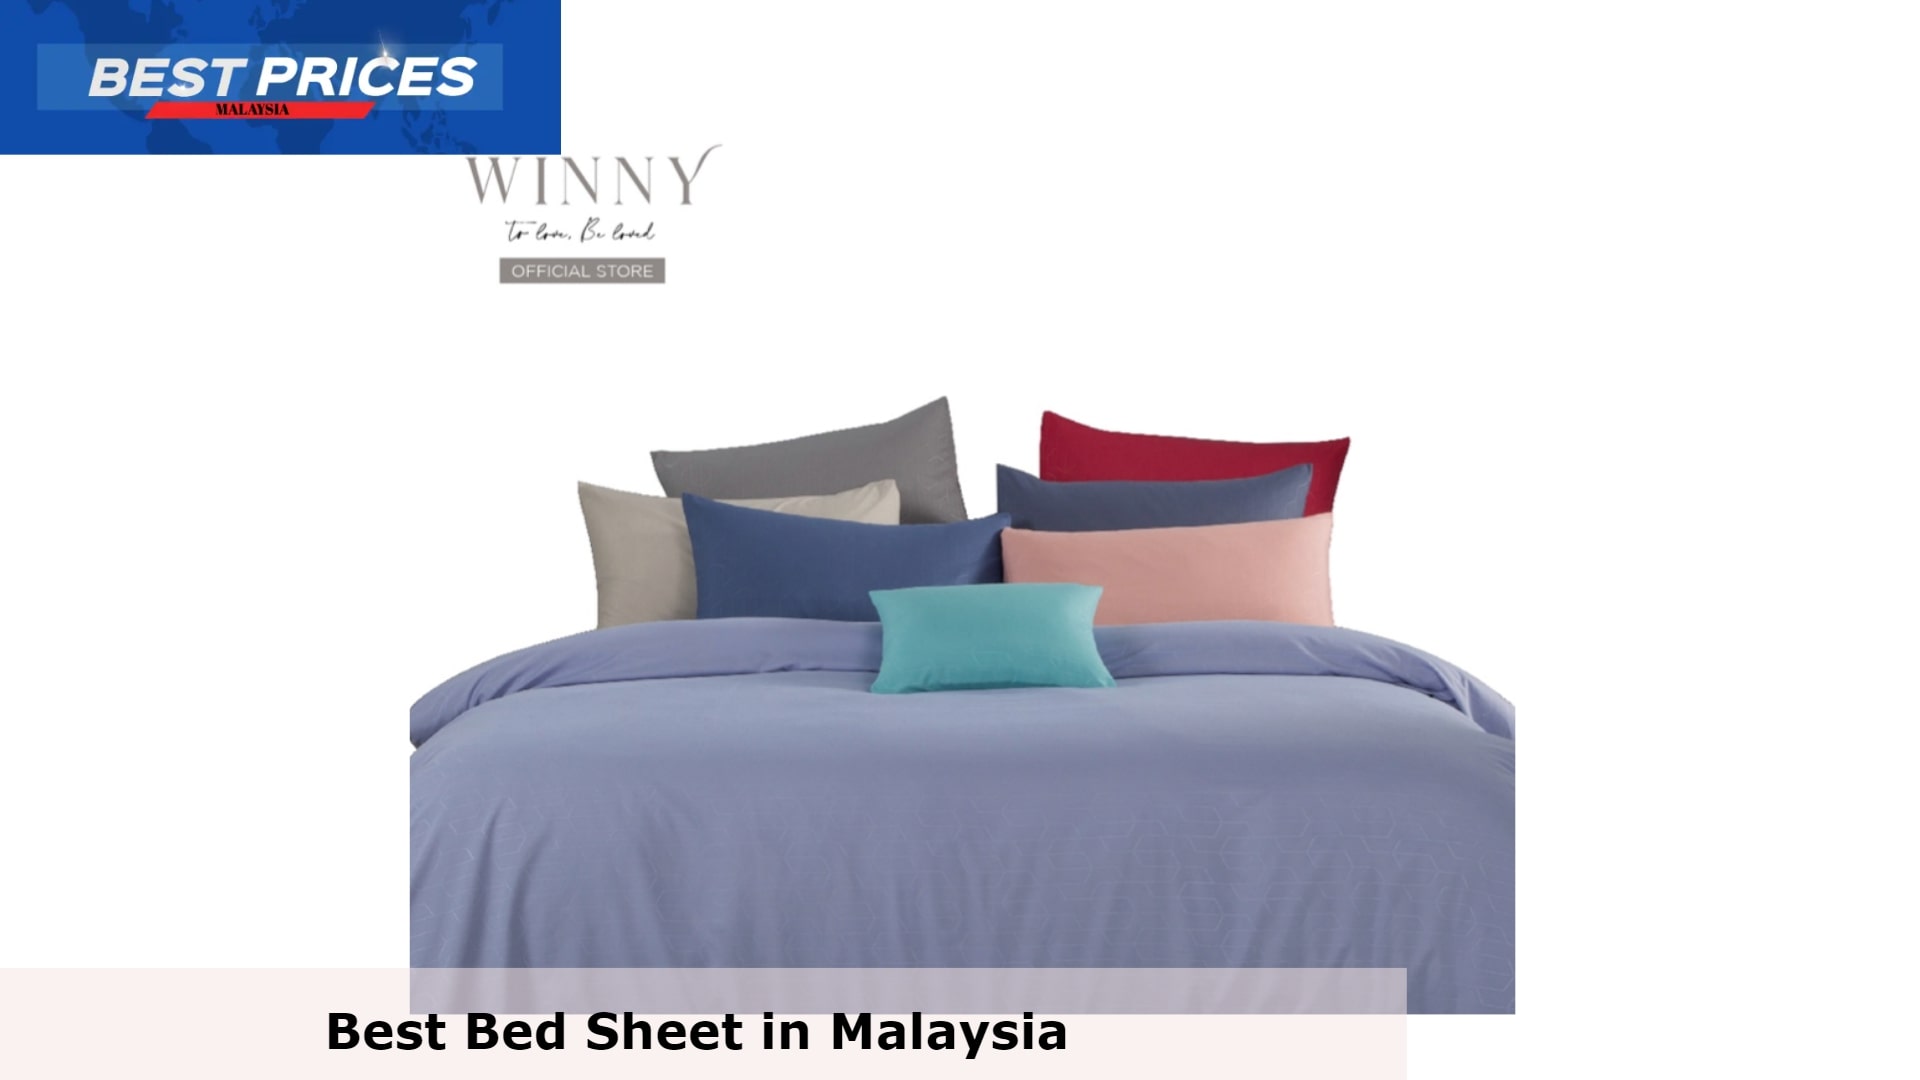 WINNY Relish Fitted Sheet Set-620TC - Bed Sheet Malaysia, Bed Sheet Malaysia, best bedsheet Malaysia, where to order bedsheet online Malaysia, bed sheet brand, bed sheet brand malaysia, best bed sheet malaysia, Best bedsheet brand Malaysia, bed sheet set, Which quality bedsheet is best?, Which cotton bedsheet is best?, Which bedsheet brand is good in Malaysia?, Is bedsheet and blanket same?, What is the point of a bedsheet?,